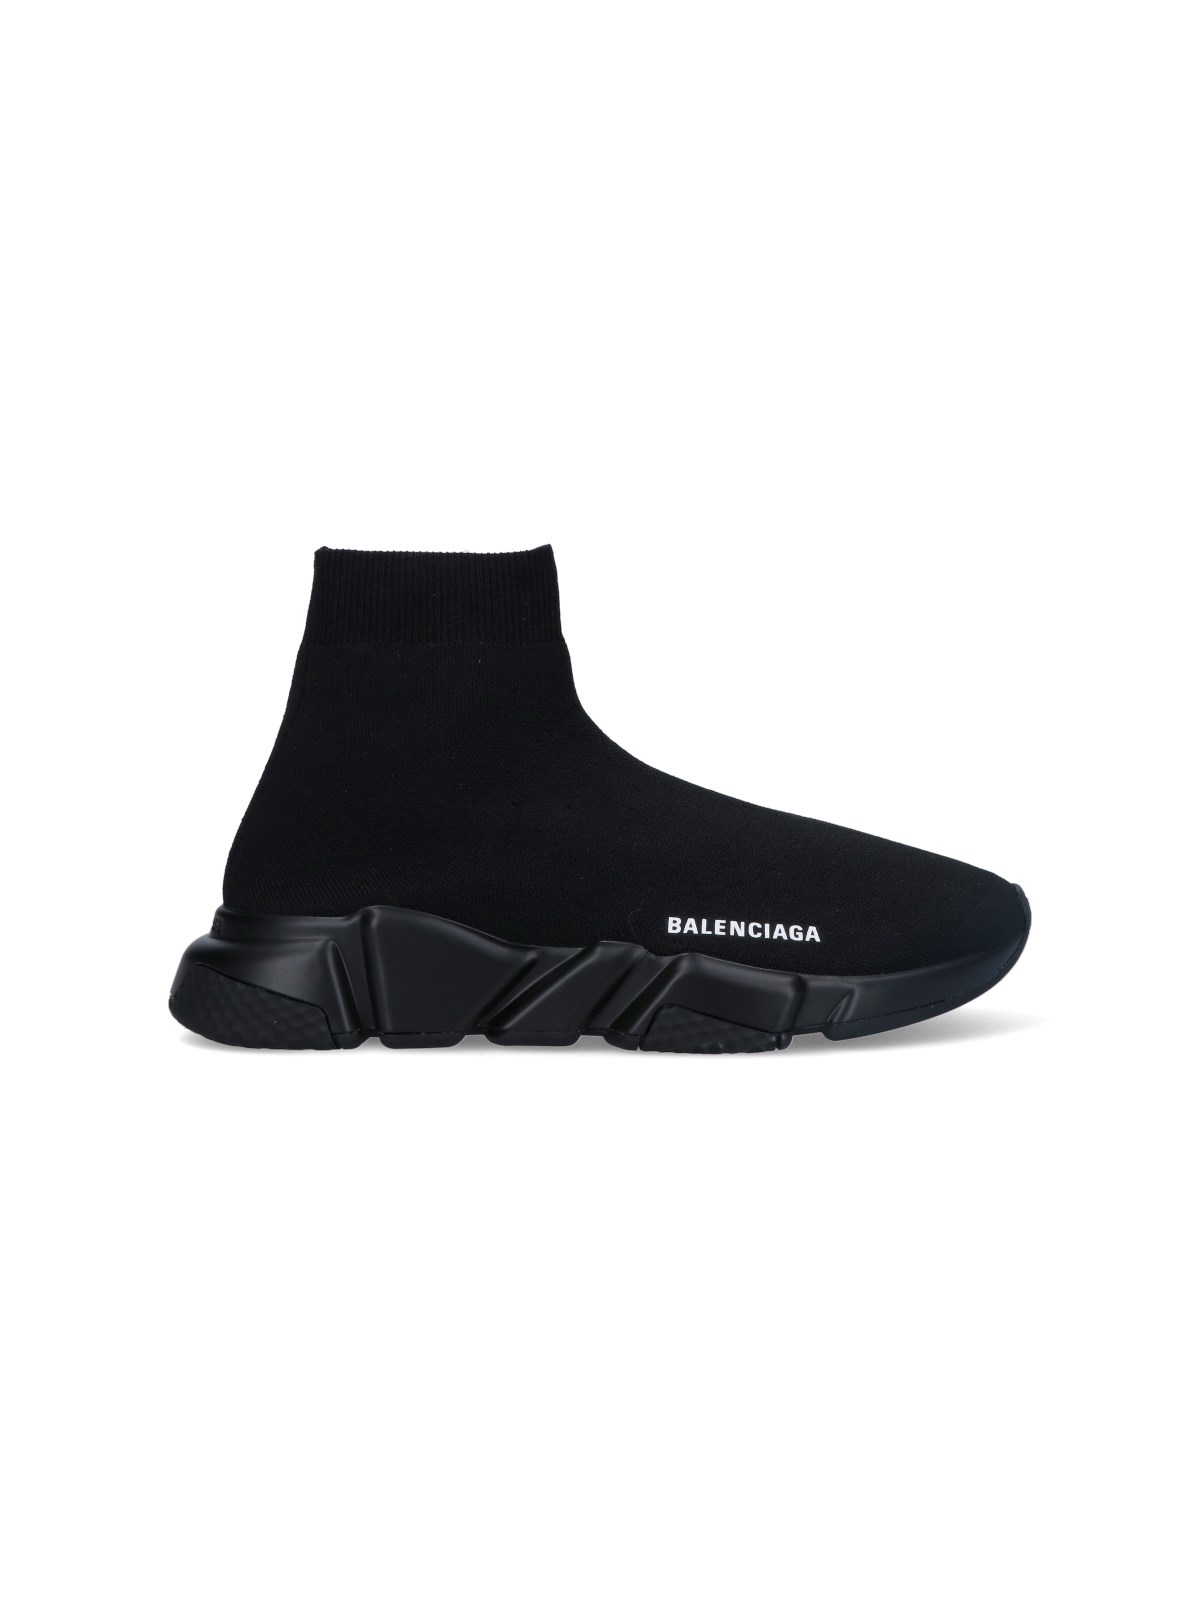 BALENCIAGA 'RECYCLED SPEED' SNEAKERS